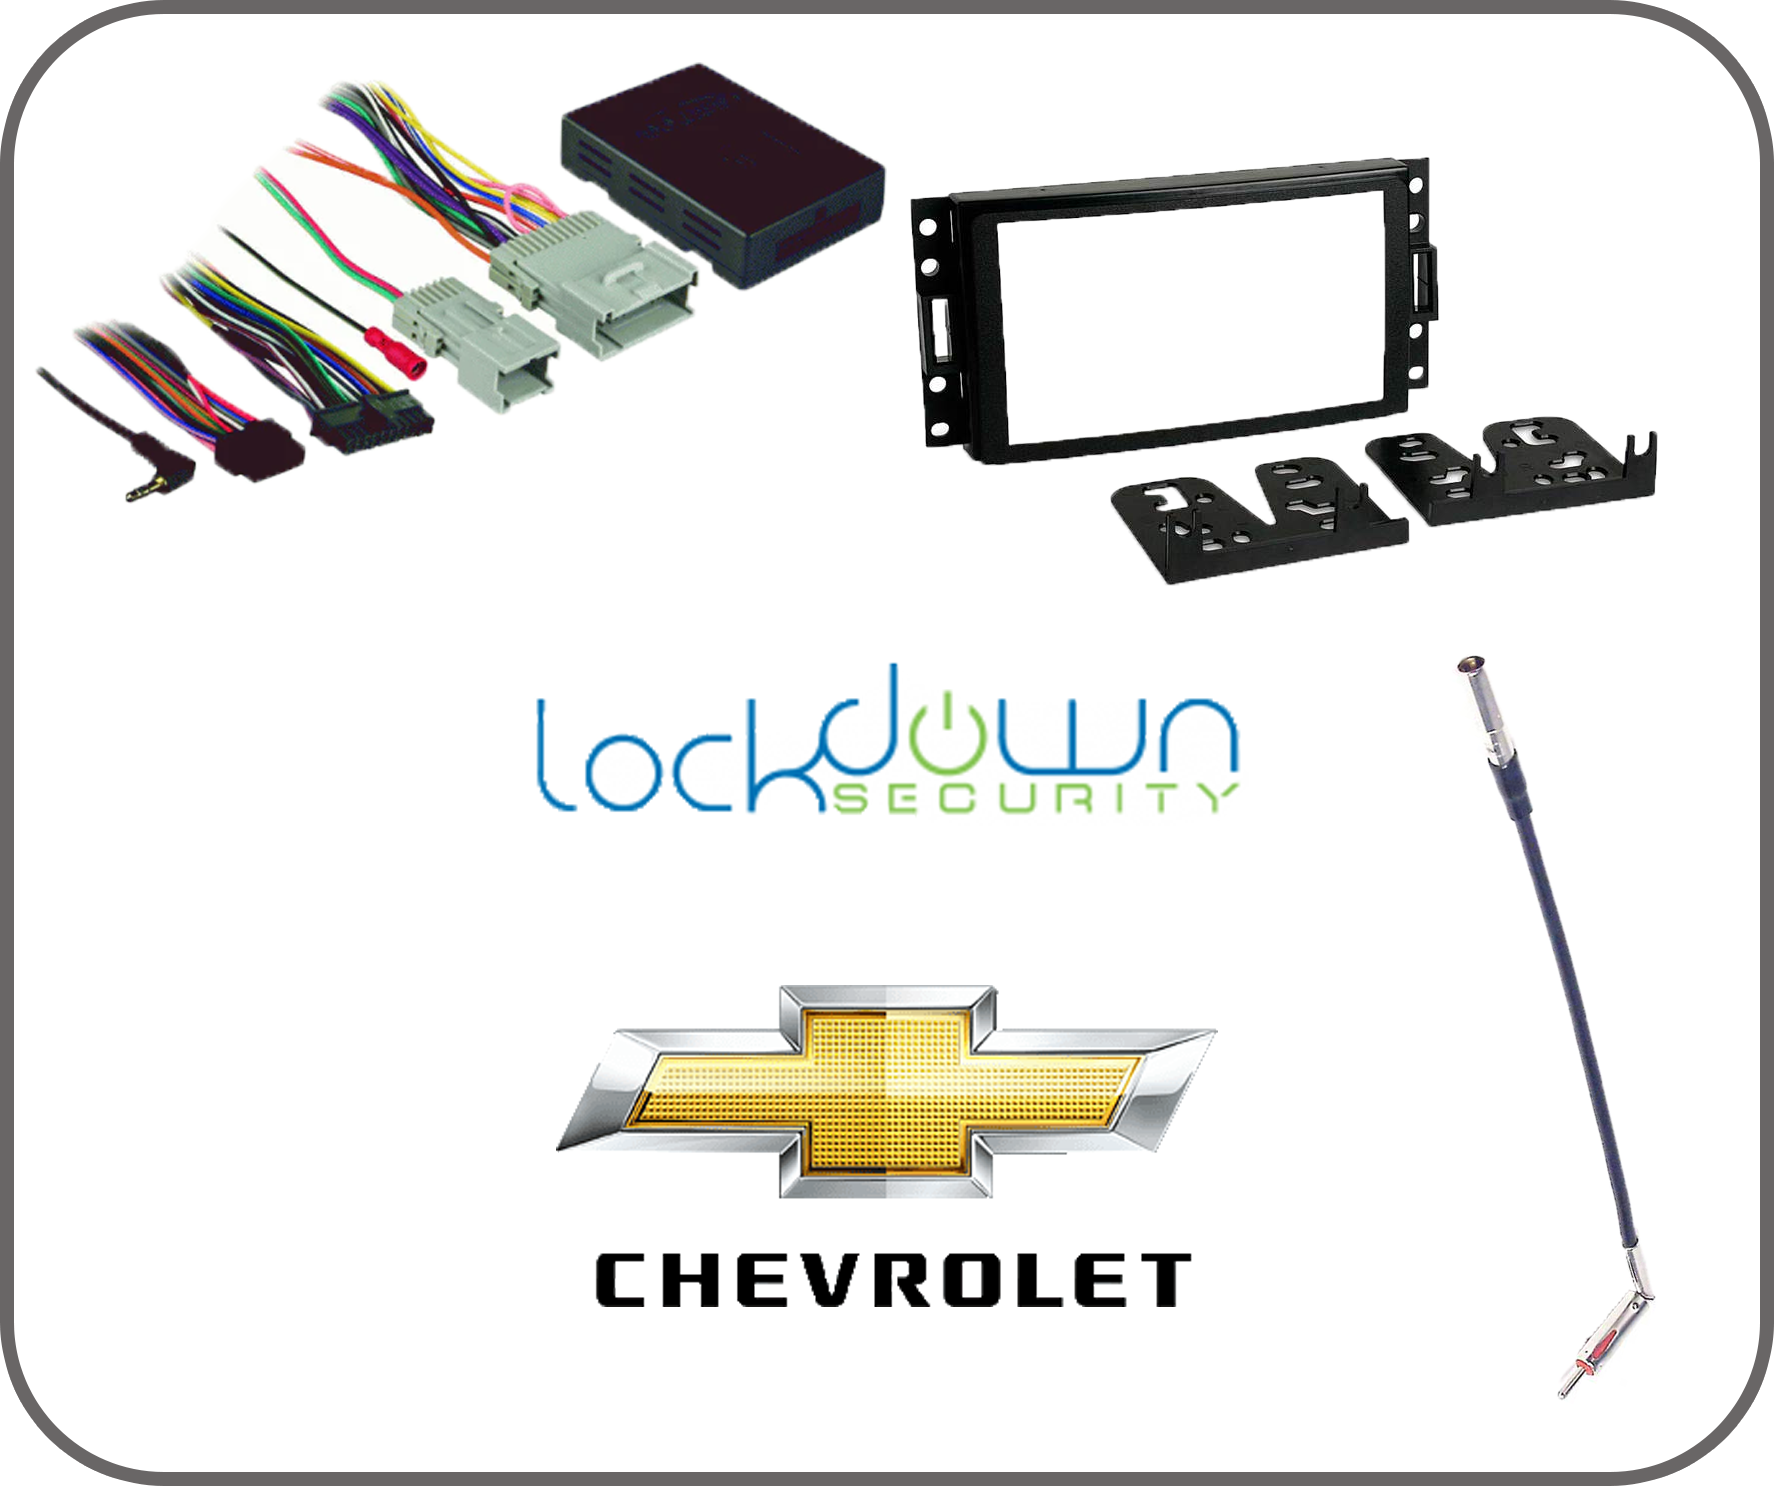 AMPLIFIED ⭕ Chevrolet Corvette 2005-2013 Radio Replacement Parts Bundle ⭕ Includes Metra 95-3304 Mount Kit, Metra 40-GM10 Antenna Adapter, Axxess AXDIS-CL2 Amplifier and Steering Wheel Control Interface